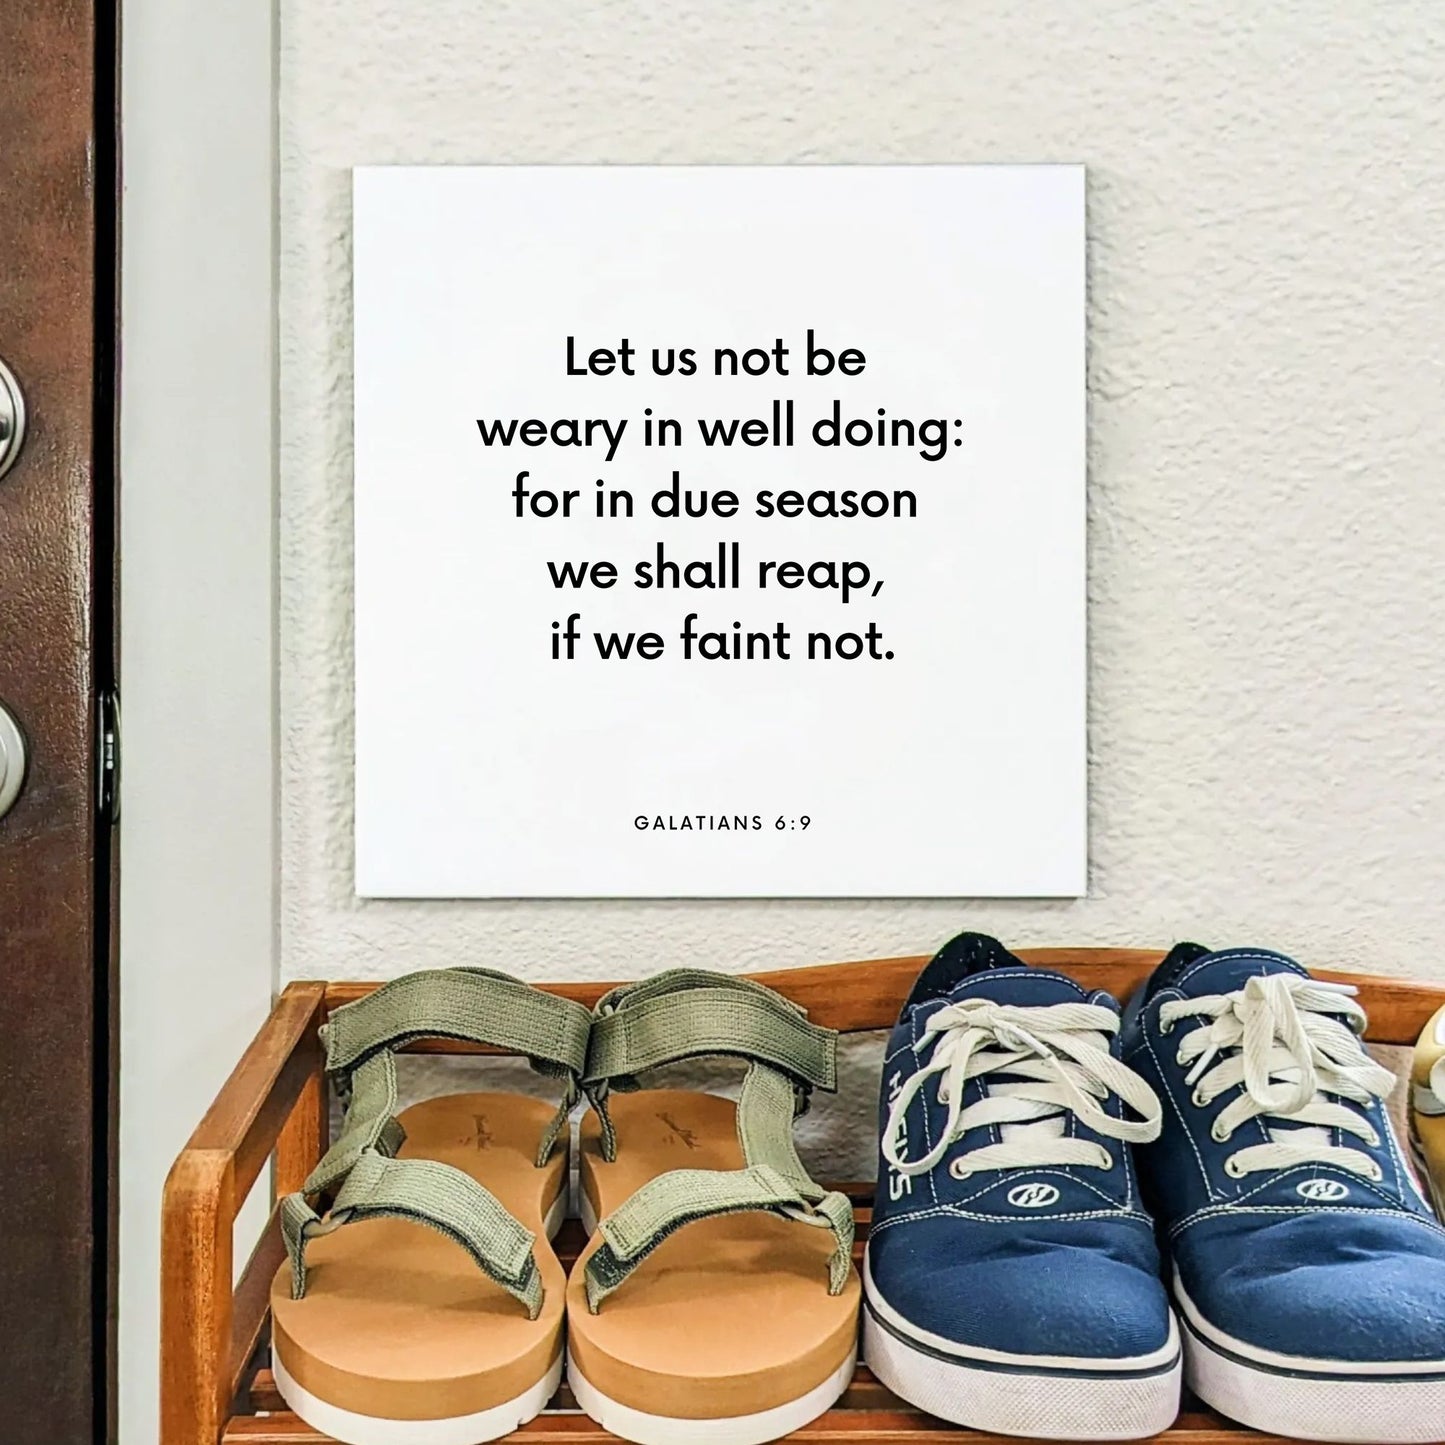 Shoes mouting of the scripture tile for Galatians 6:9 - "Let us not be weary in well doing"